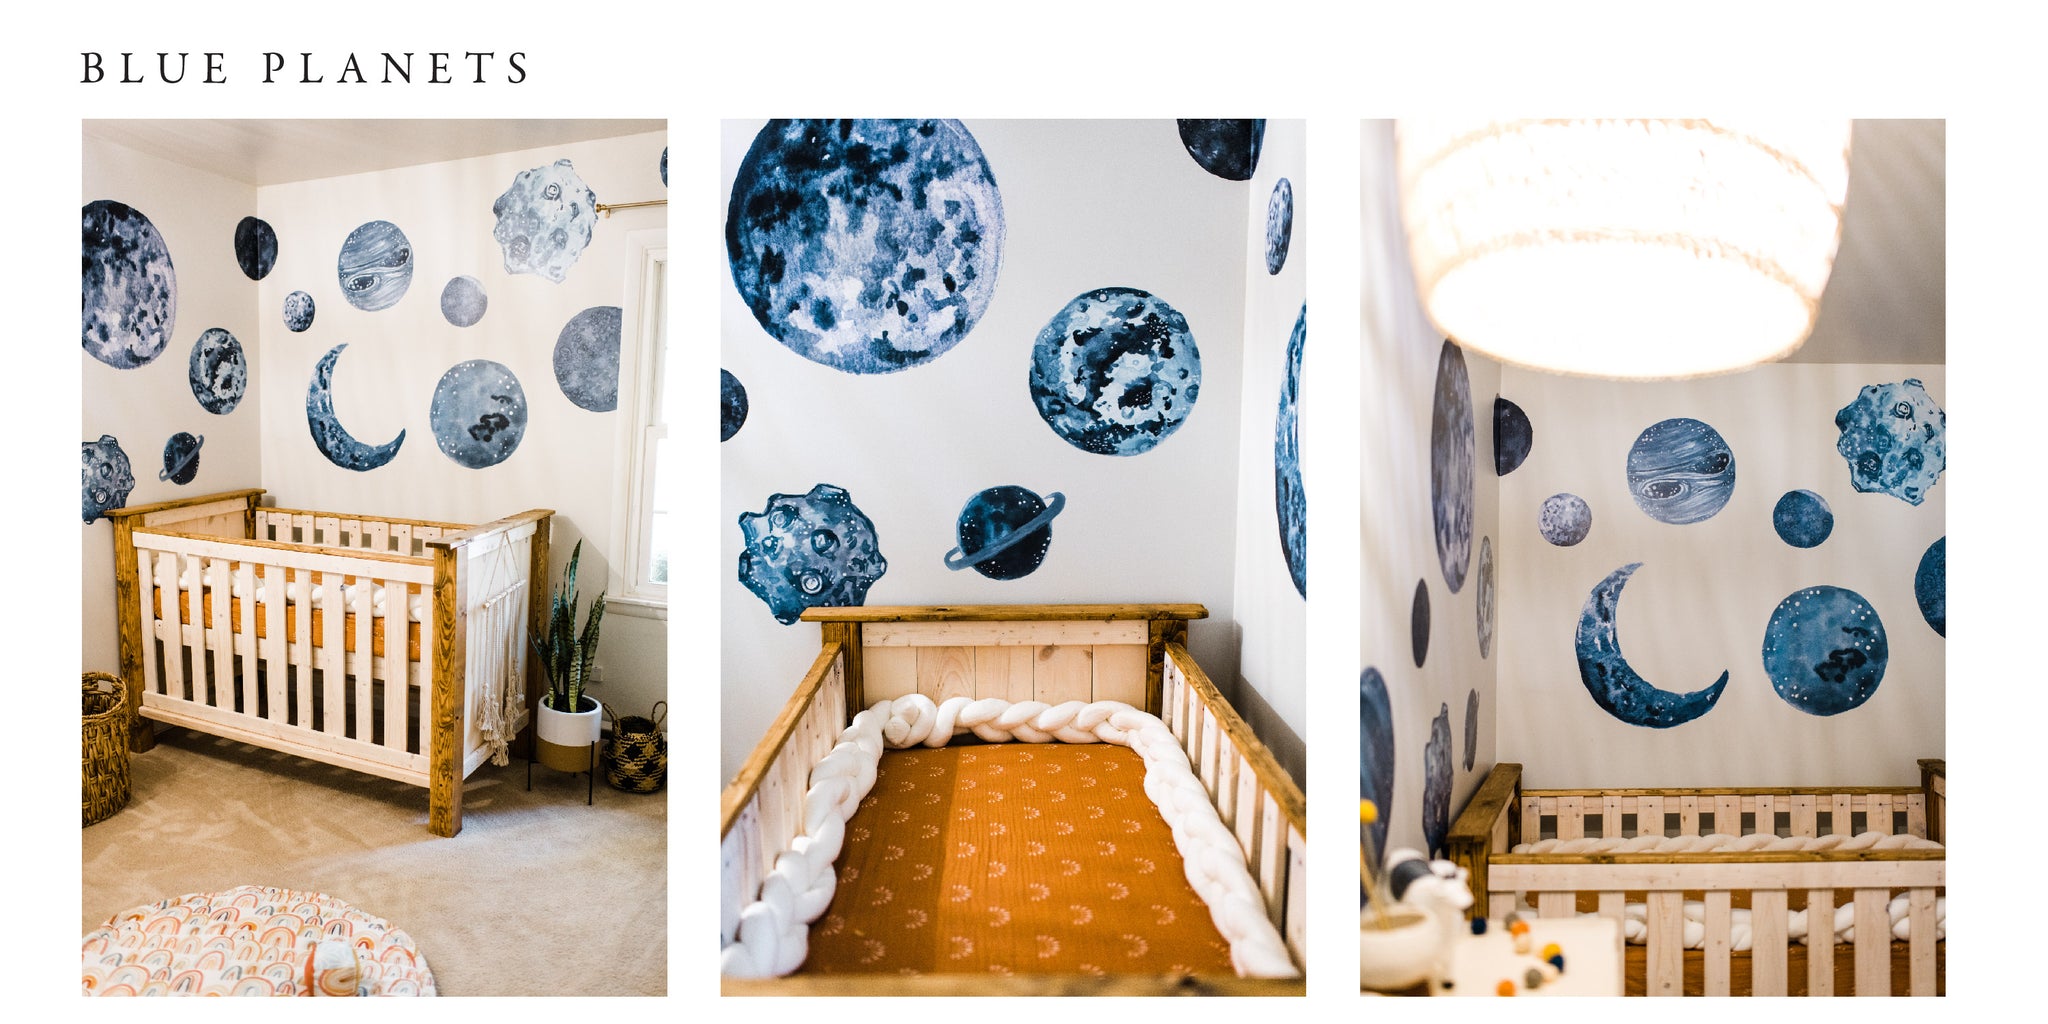 Room with blue planets wall decals